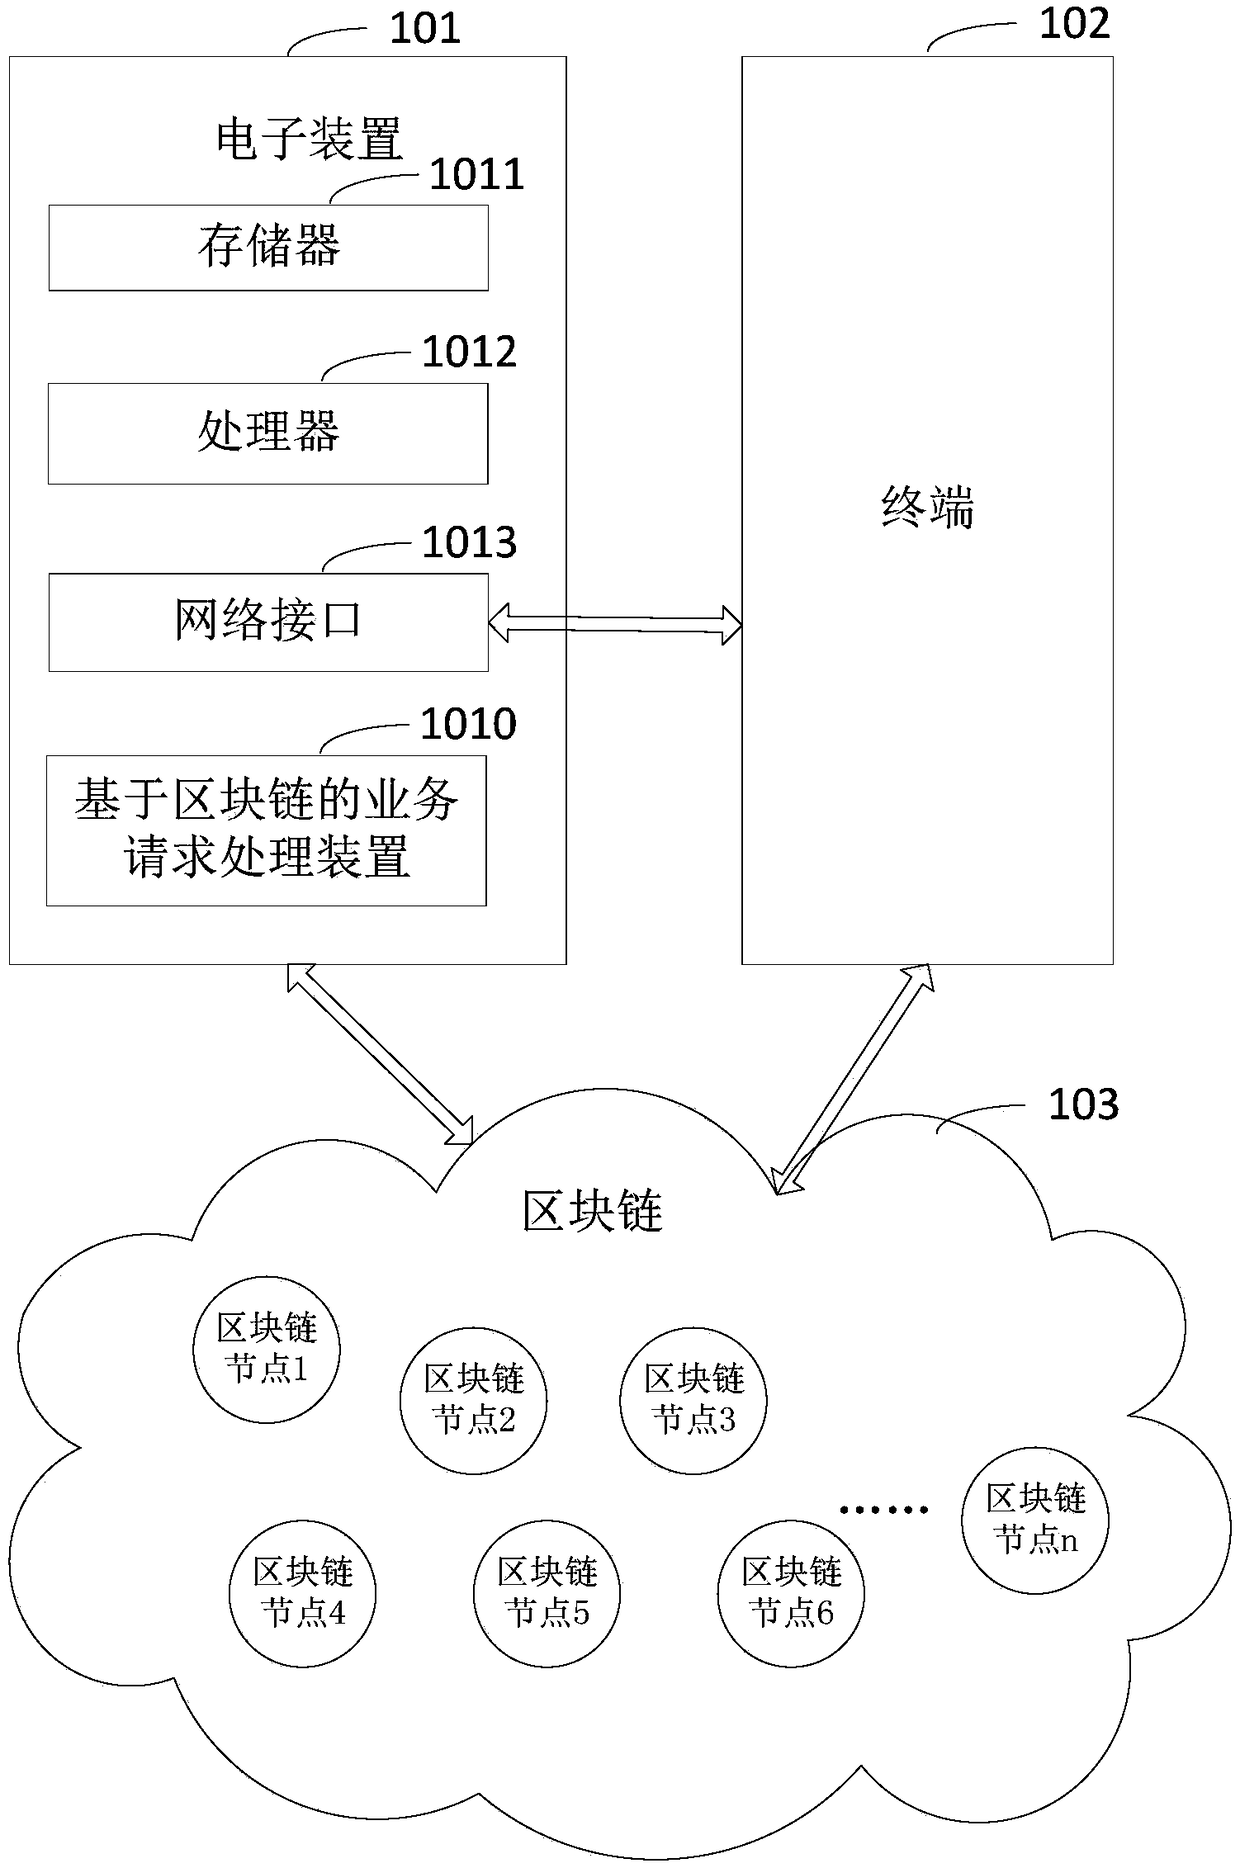 Blockchain-based service request processing method and device, and computer device